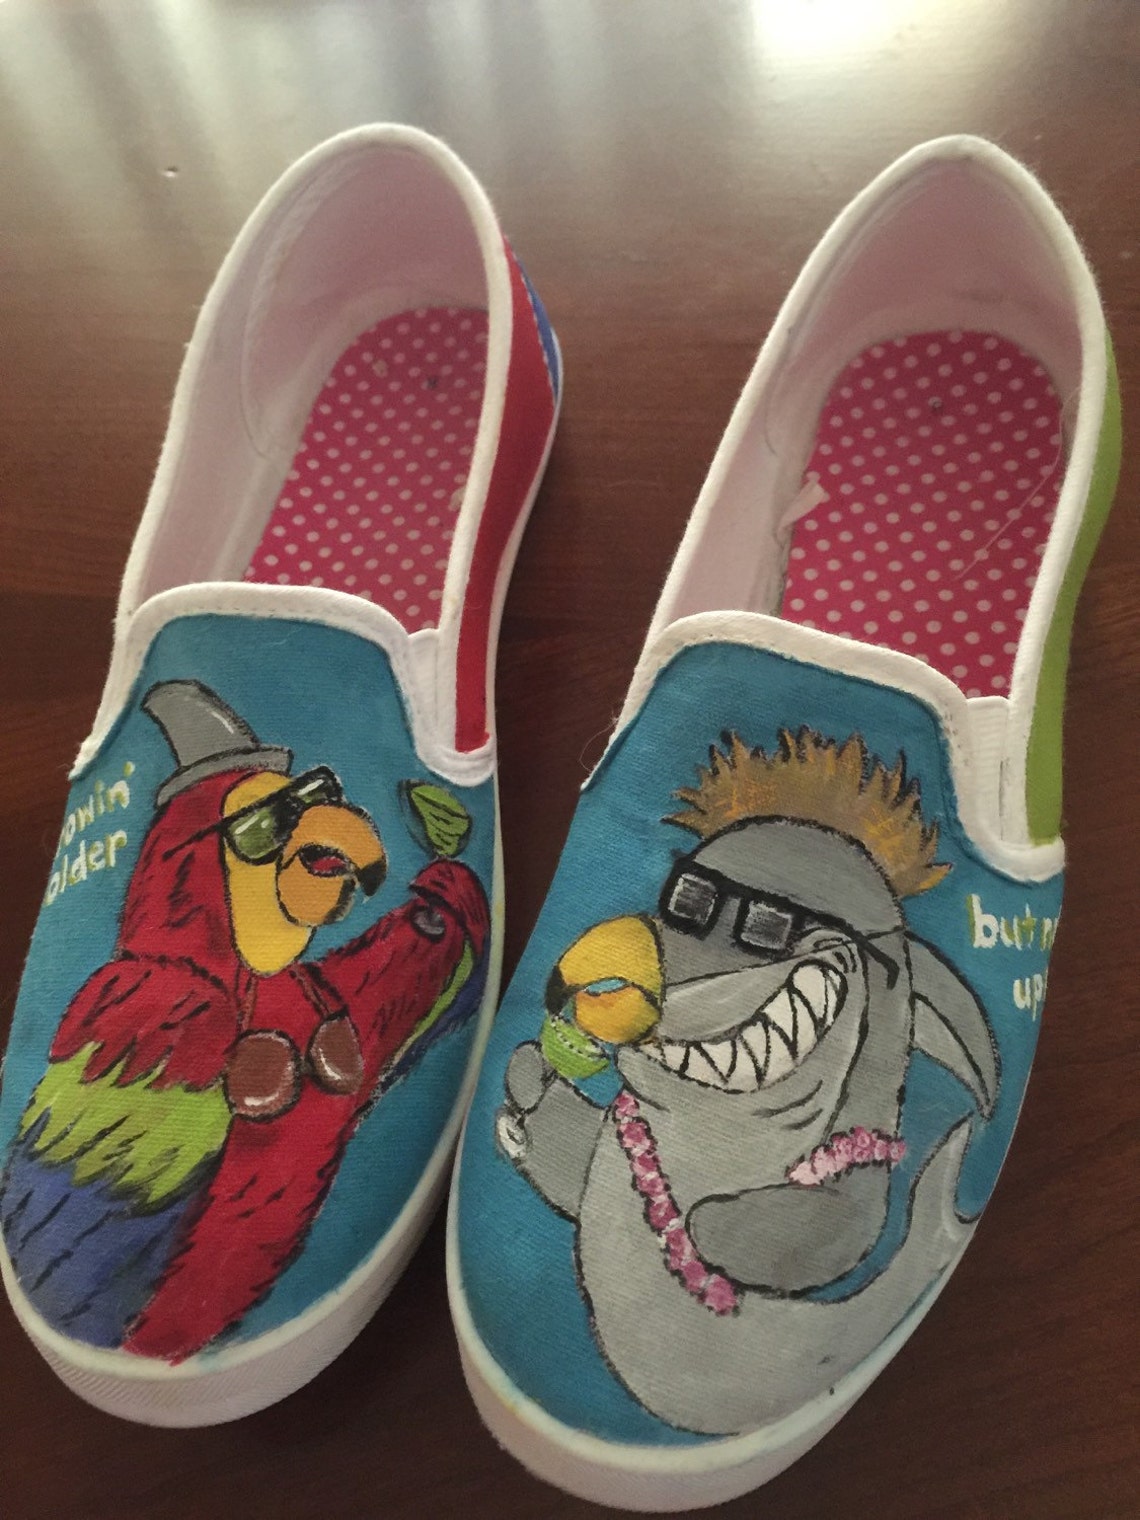 Hand Painted Parrothead Jimmy Buffett Themed Shoes - Etsy